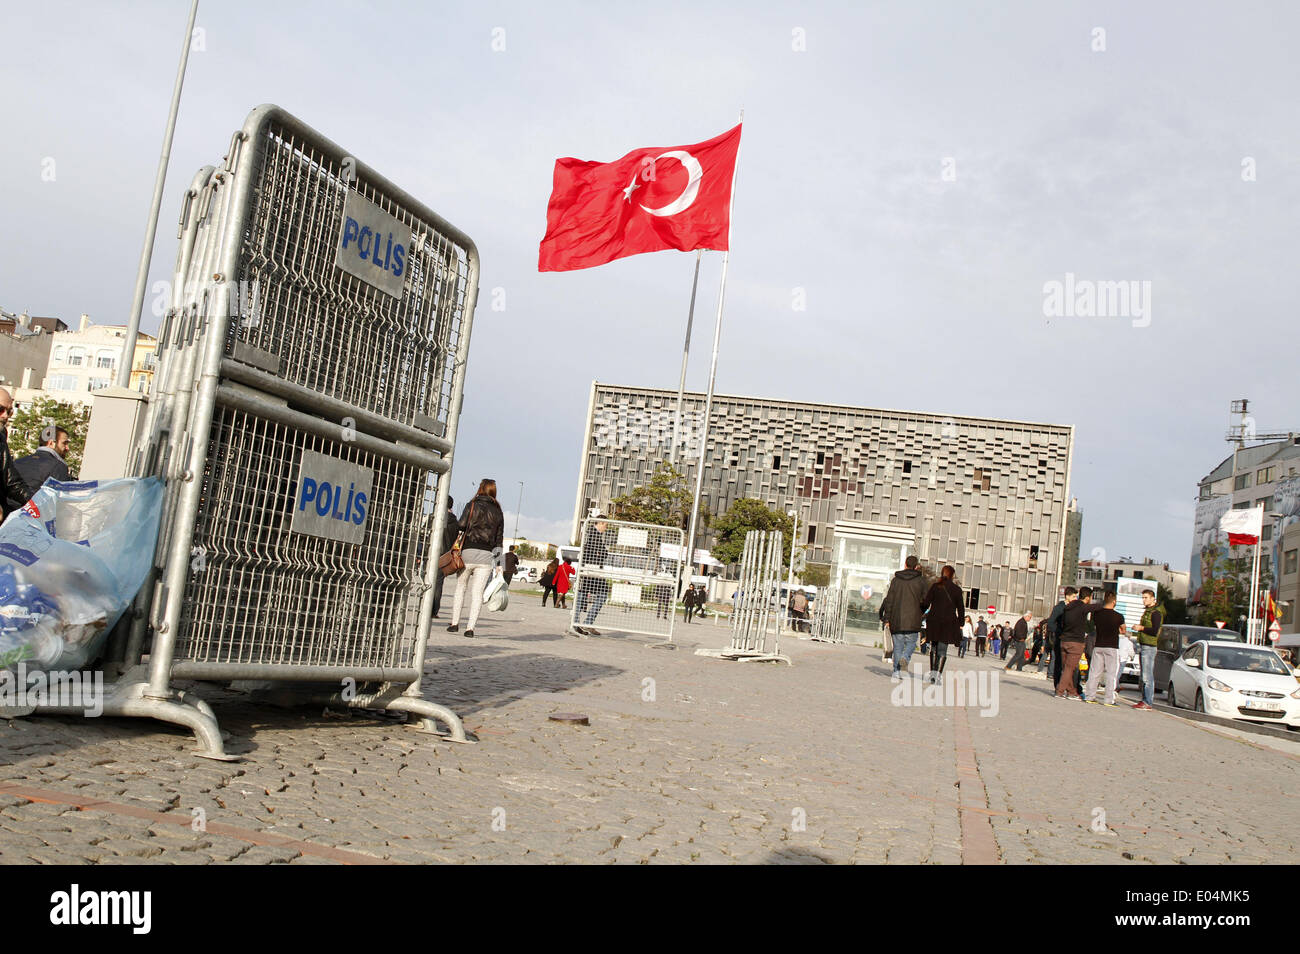 This year, the city of Istanbul, Taksim Square has reportedly locked due to construction, the traditional, but a long time forbidden May Day parade ground of the Turkish trade unions, left-wing political parties and youth movements. On May 1st 2014, Istanbul, Turkey./picture alliance Stock Photo